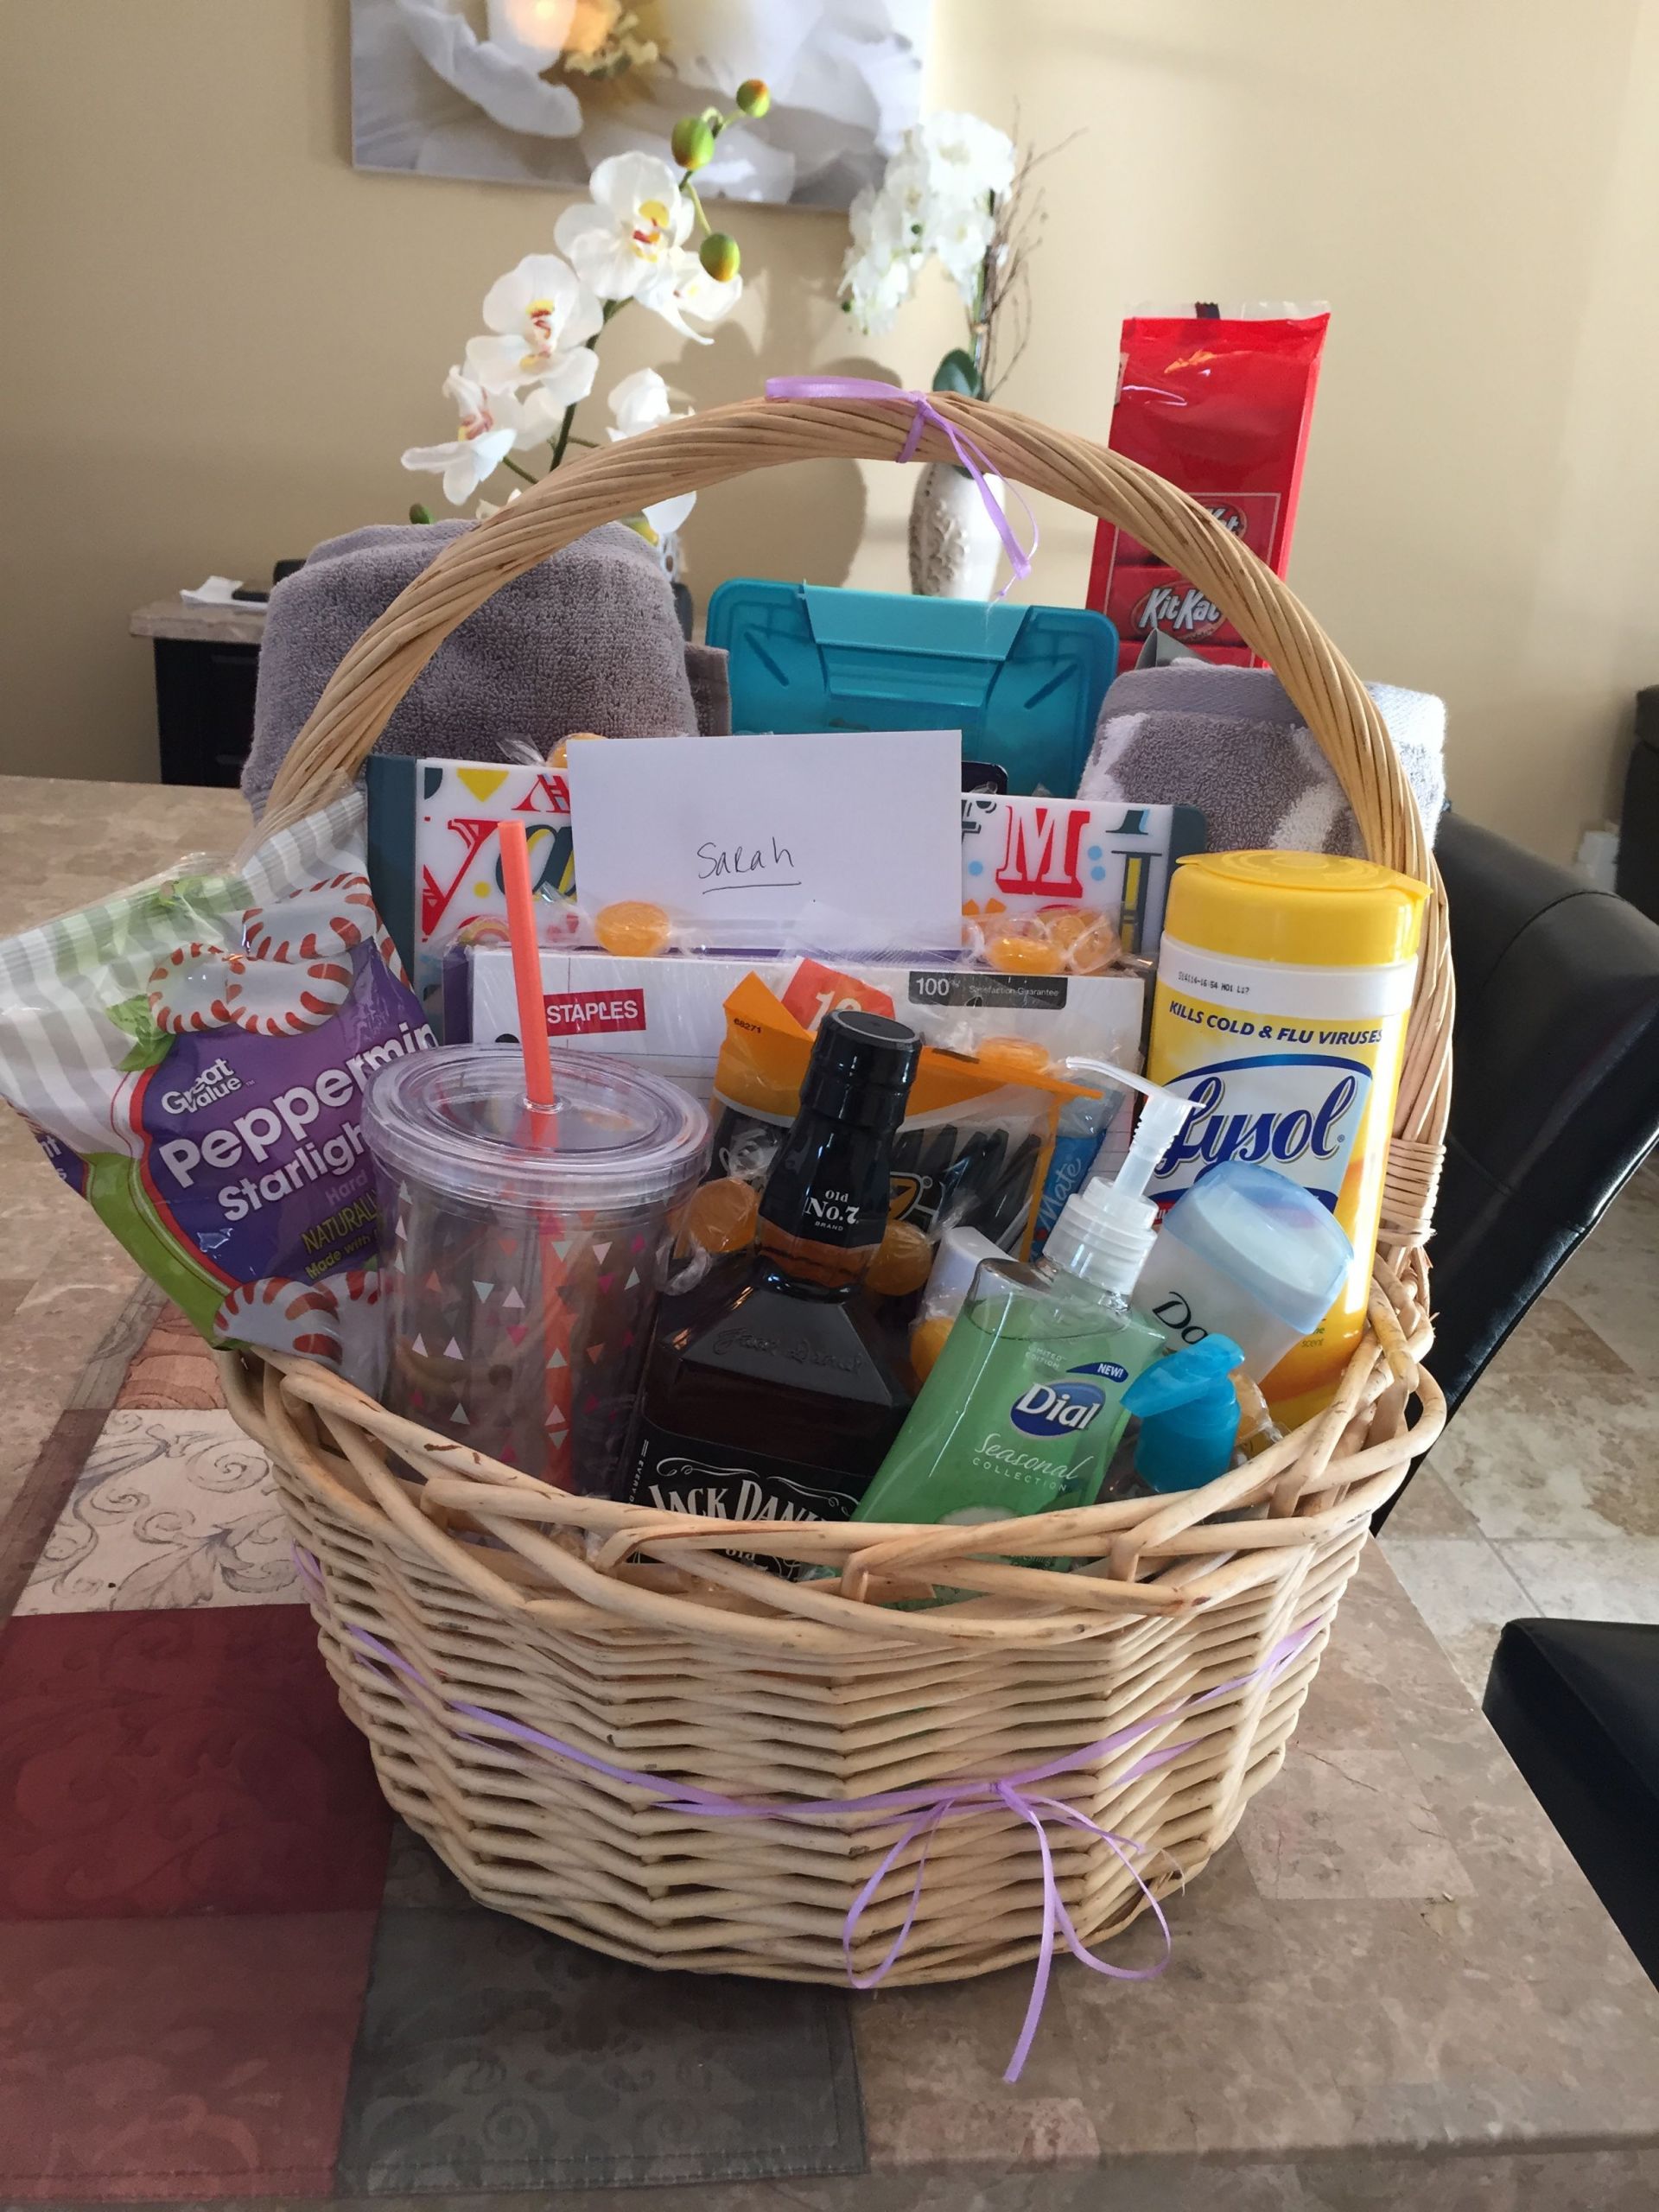 Going To College Gift Basket Ideas
 Going away to college basket